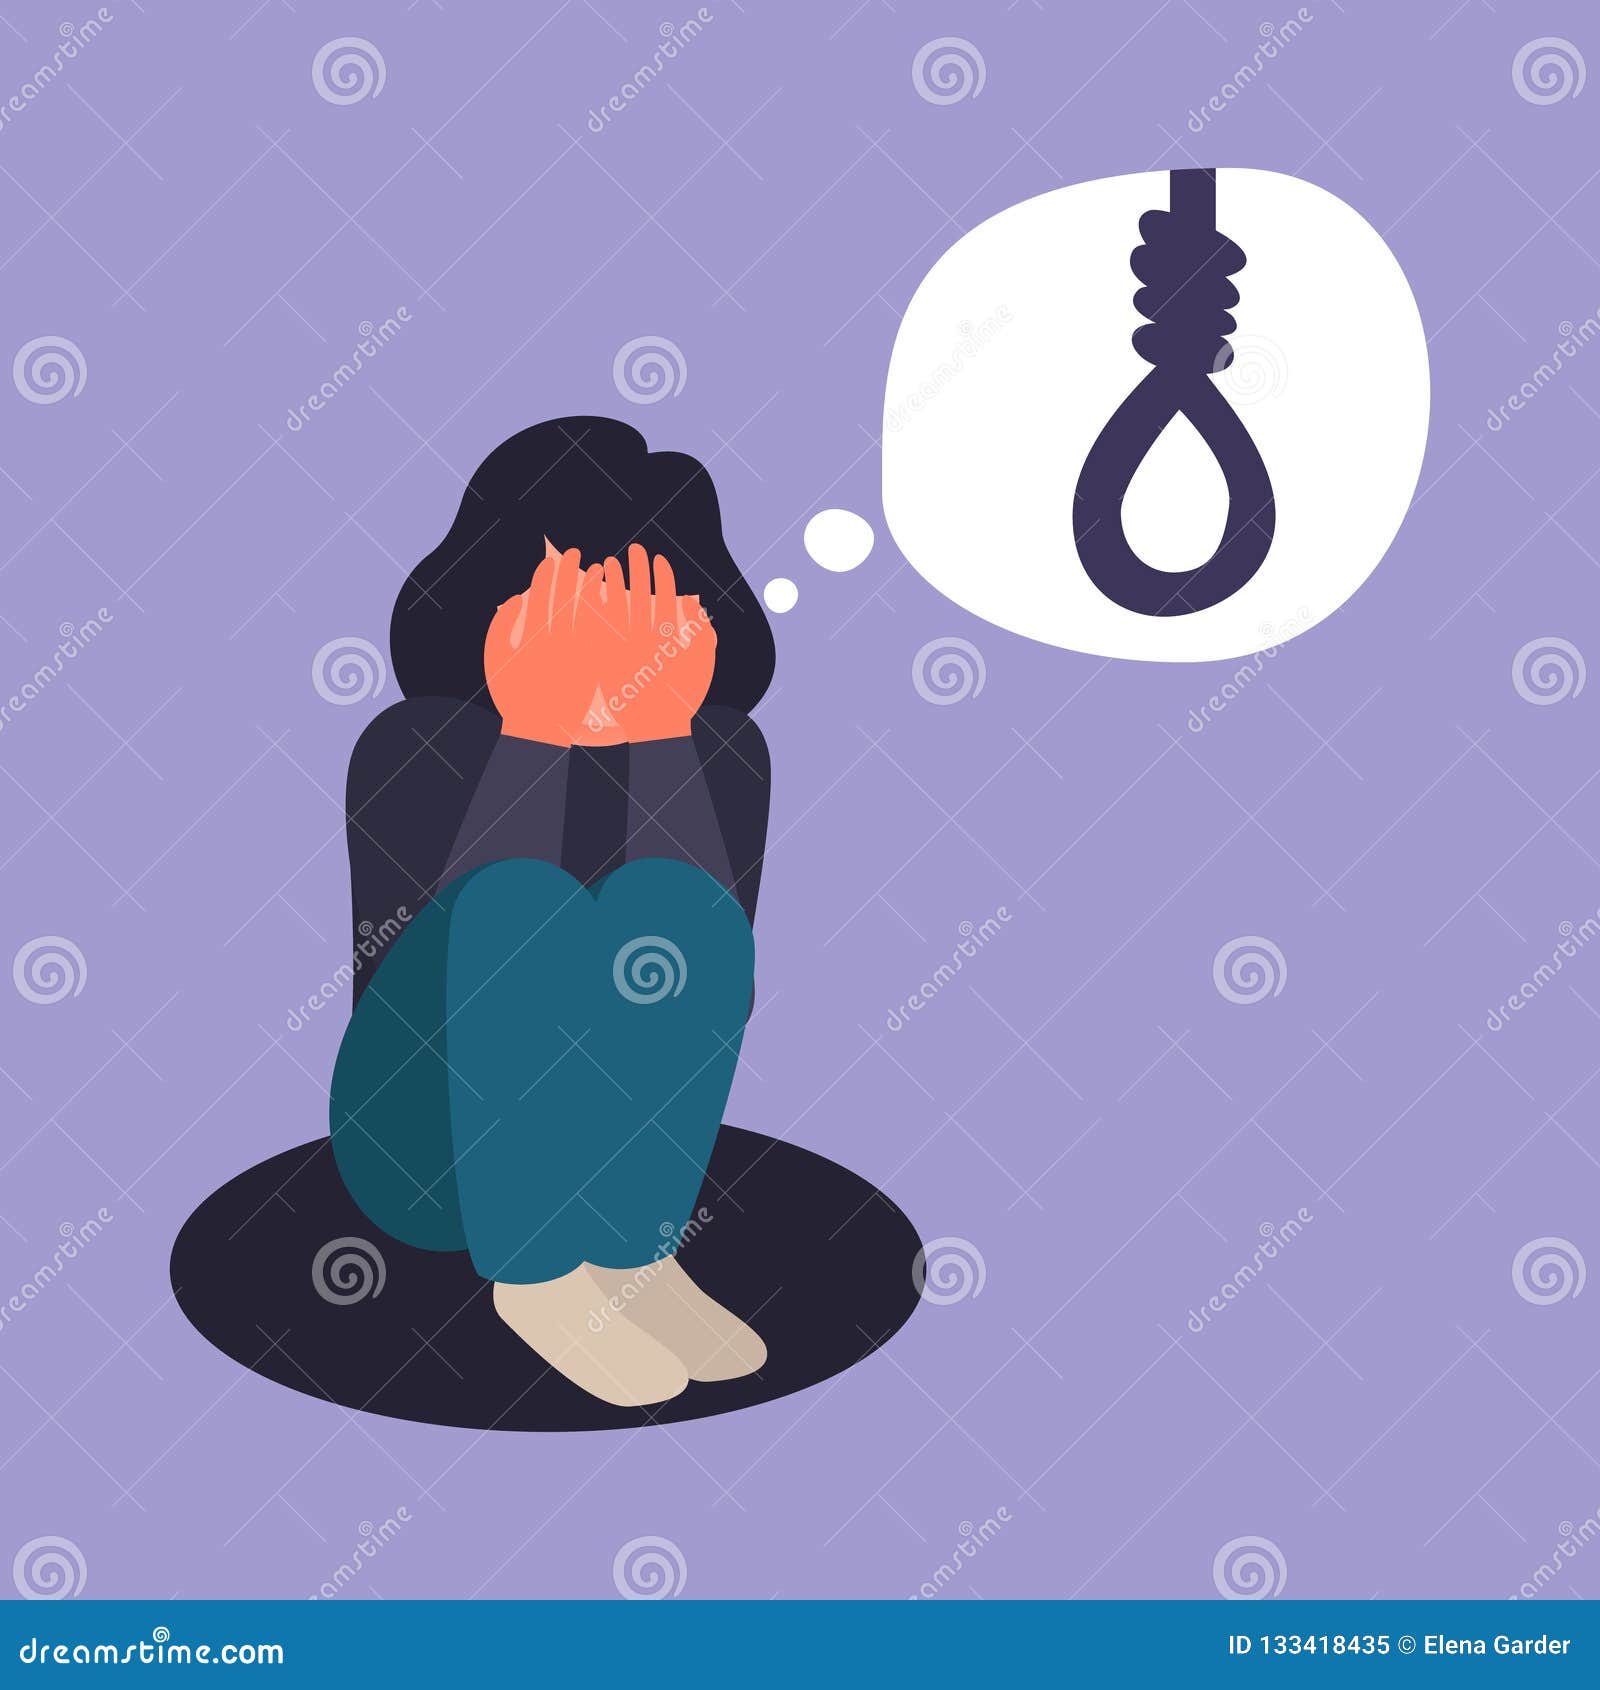 Sad Teen Female Think about Death. Depressed Woman Want To Commit Suicide  by Hanging Stock Illustration - Illustration of cartoon, illness: 133418435